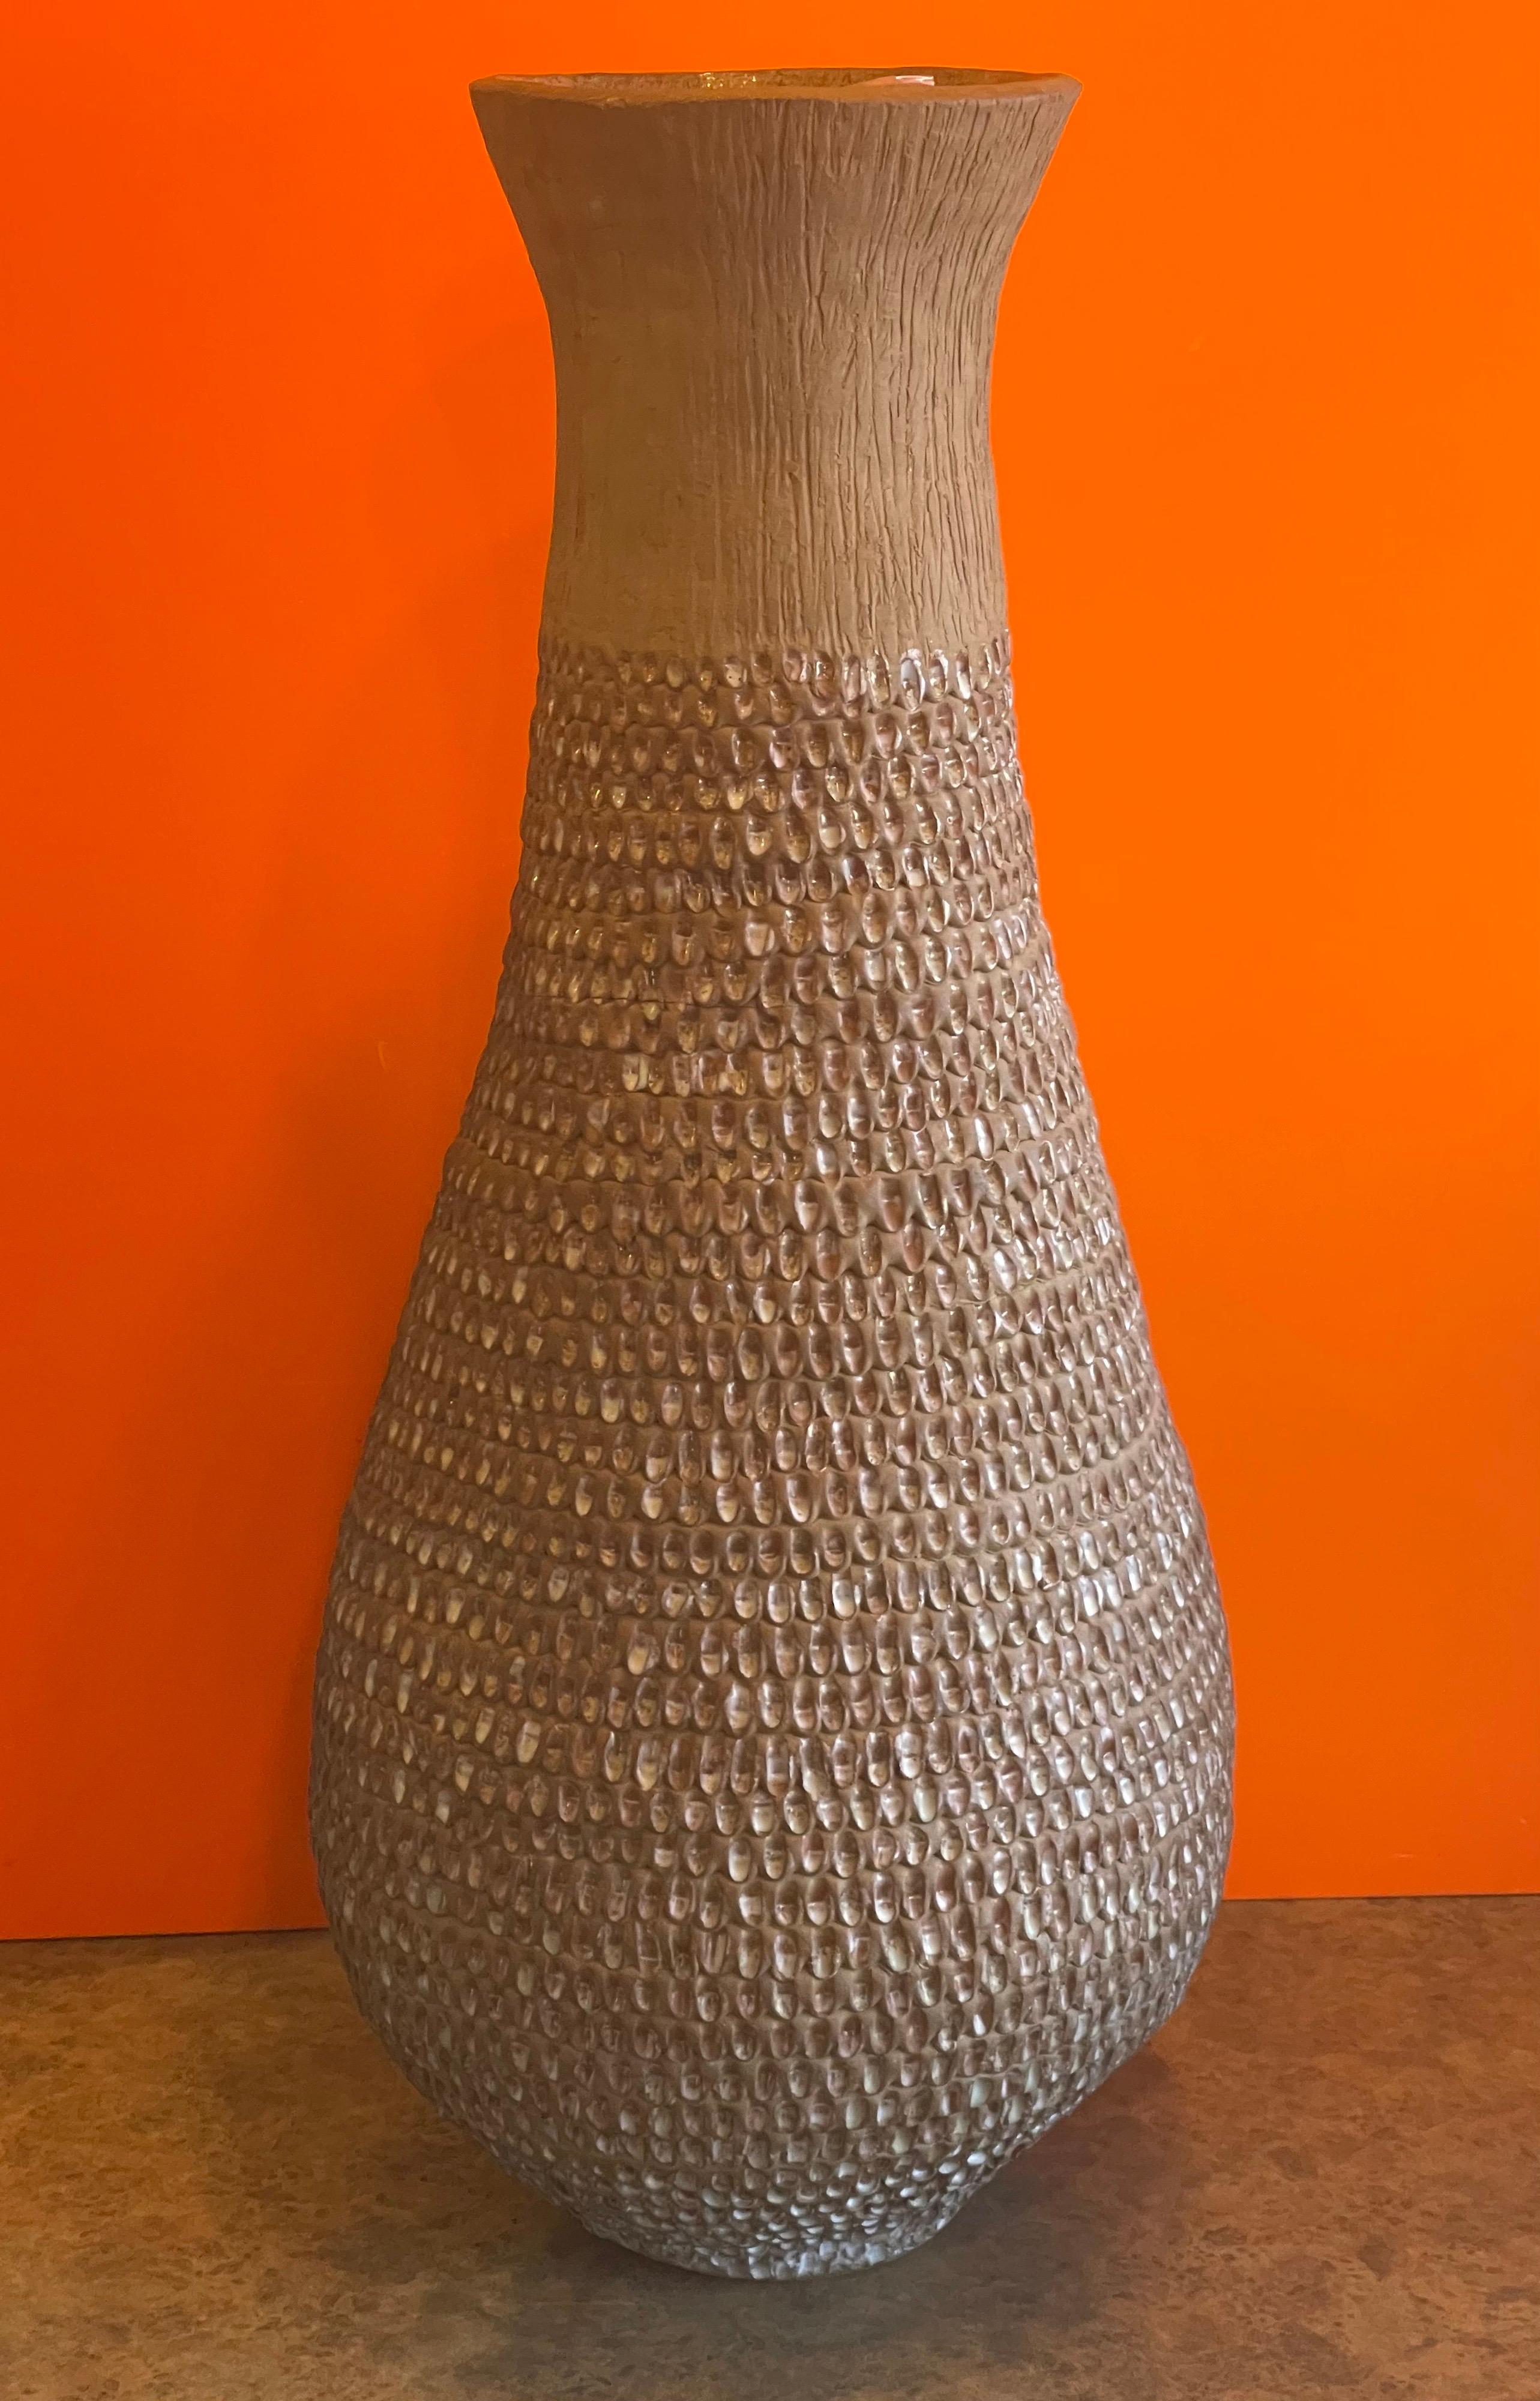 American Massive Earthenware Pottery Vase in the Style of David Cressey / Robert Maxwell